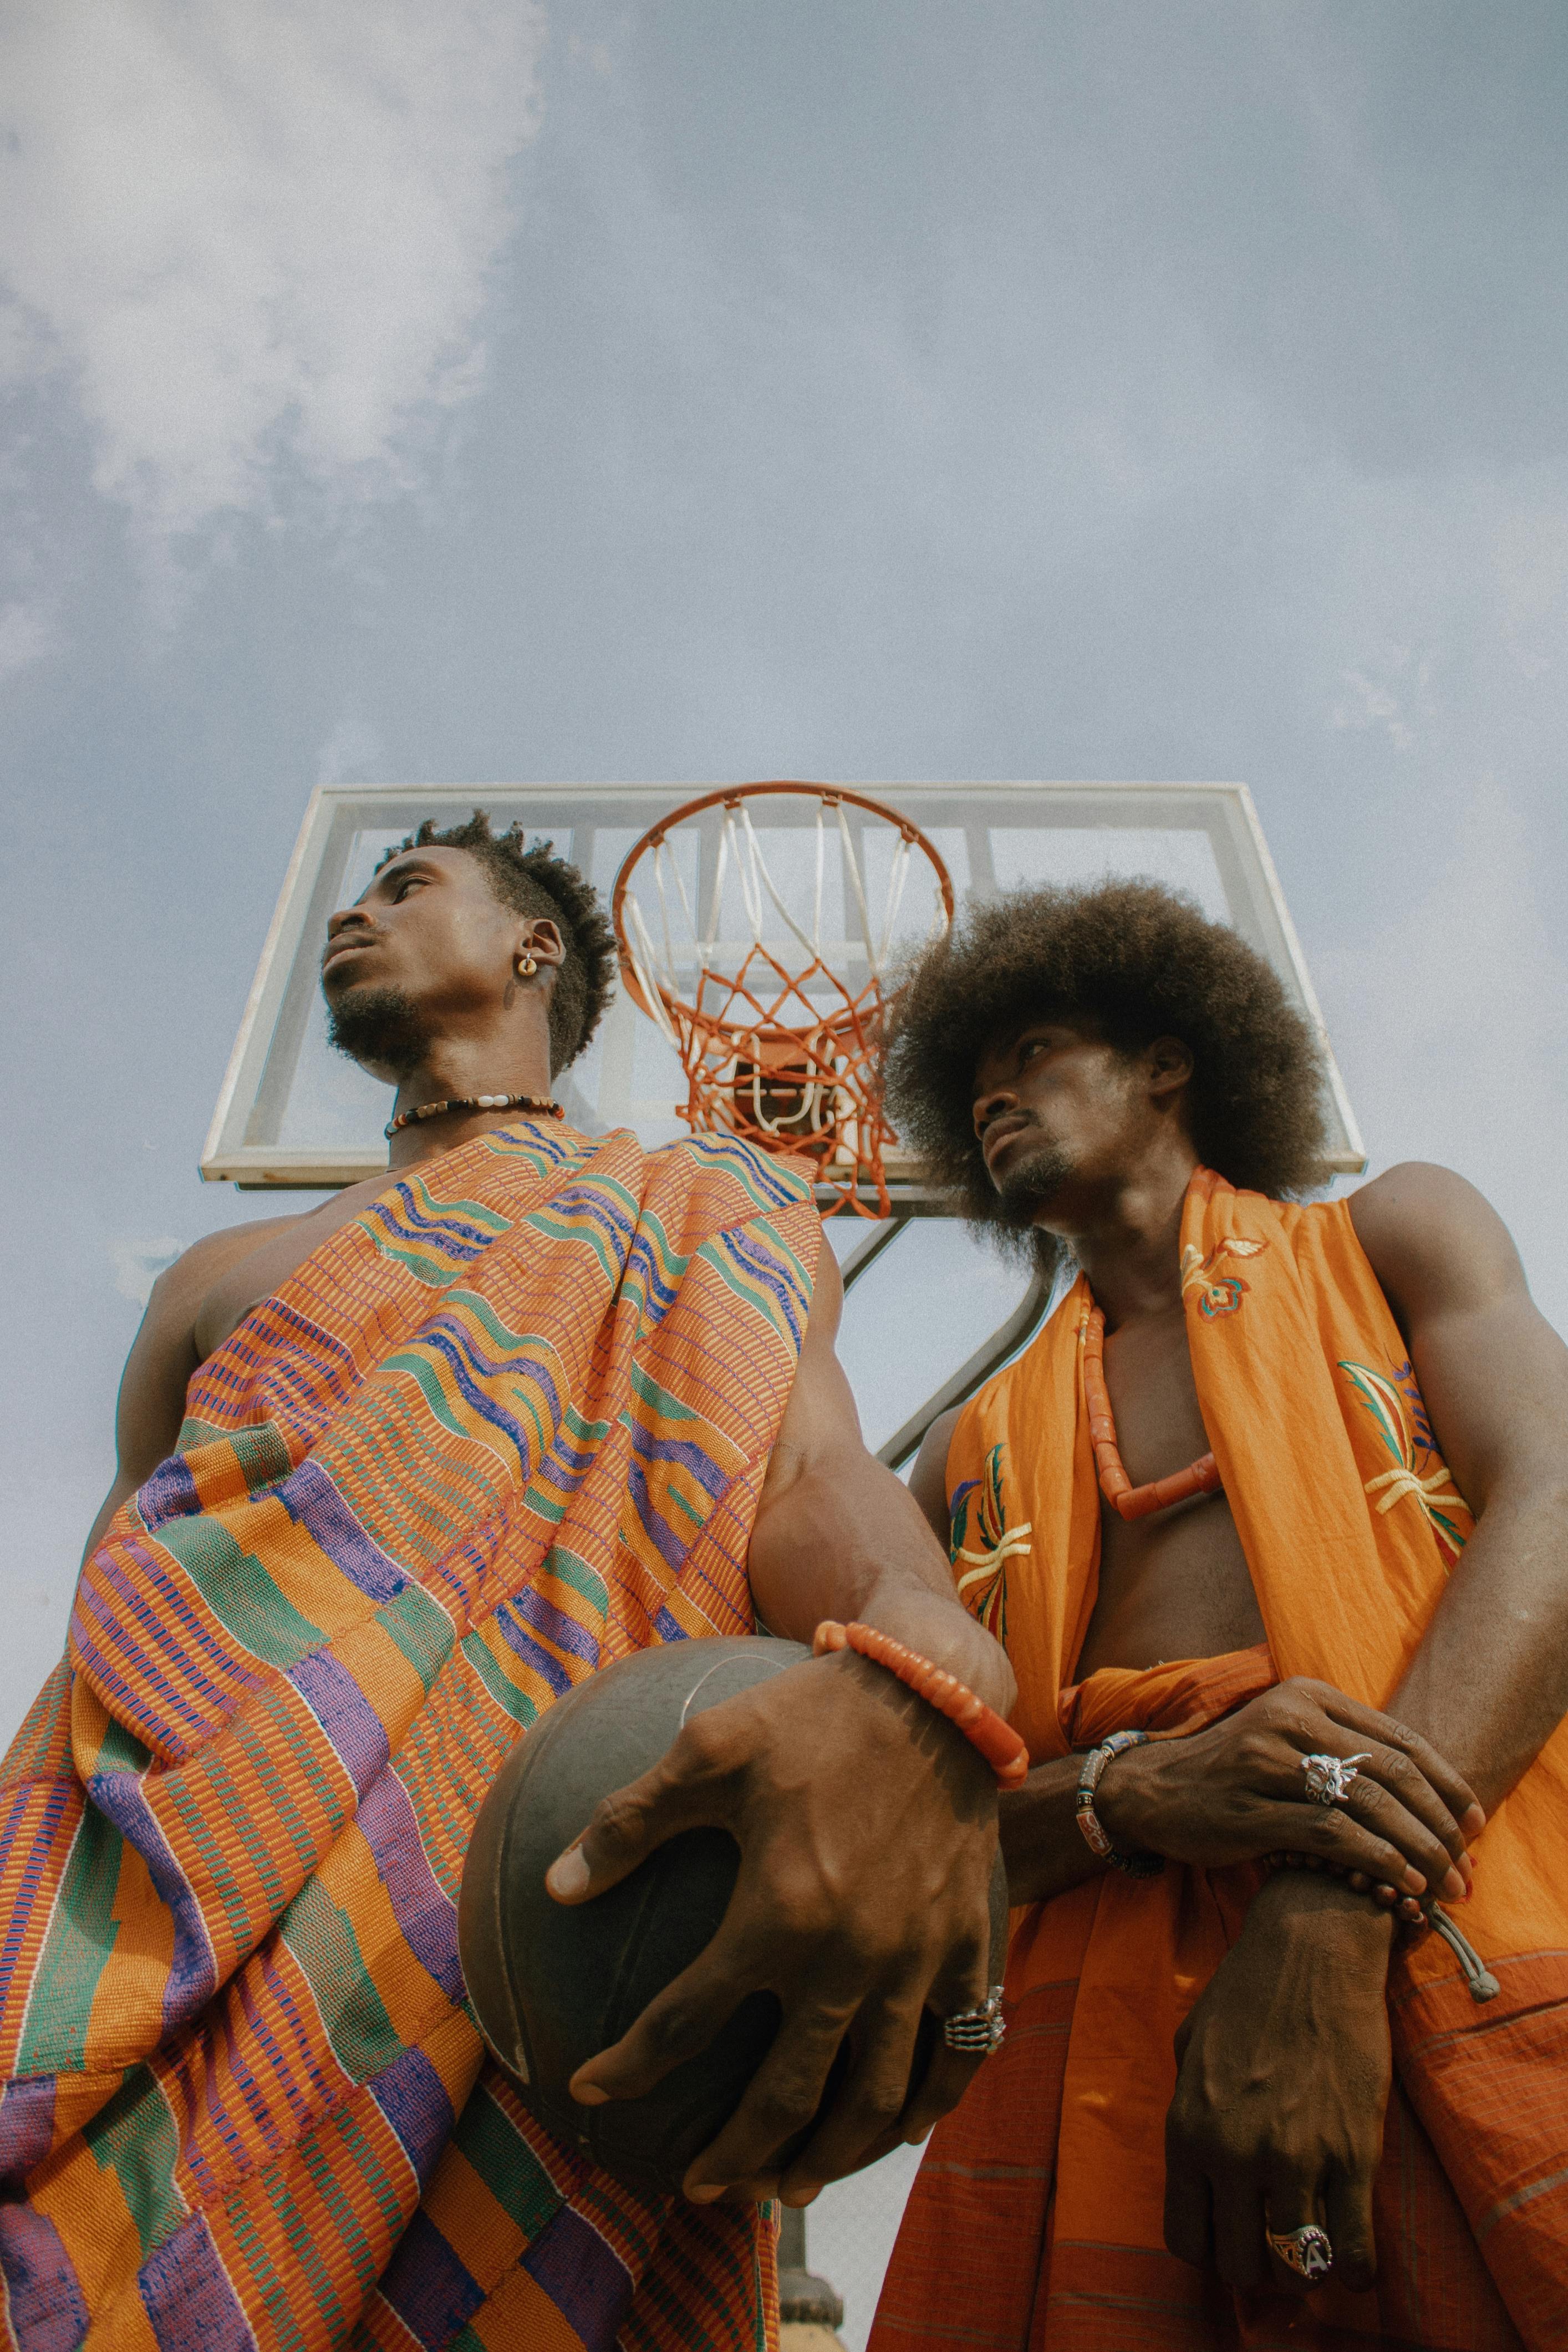 men in traditional clothing with basketball balls